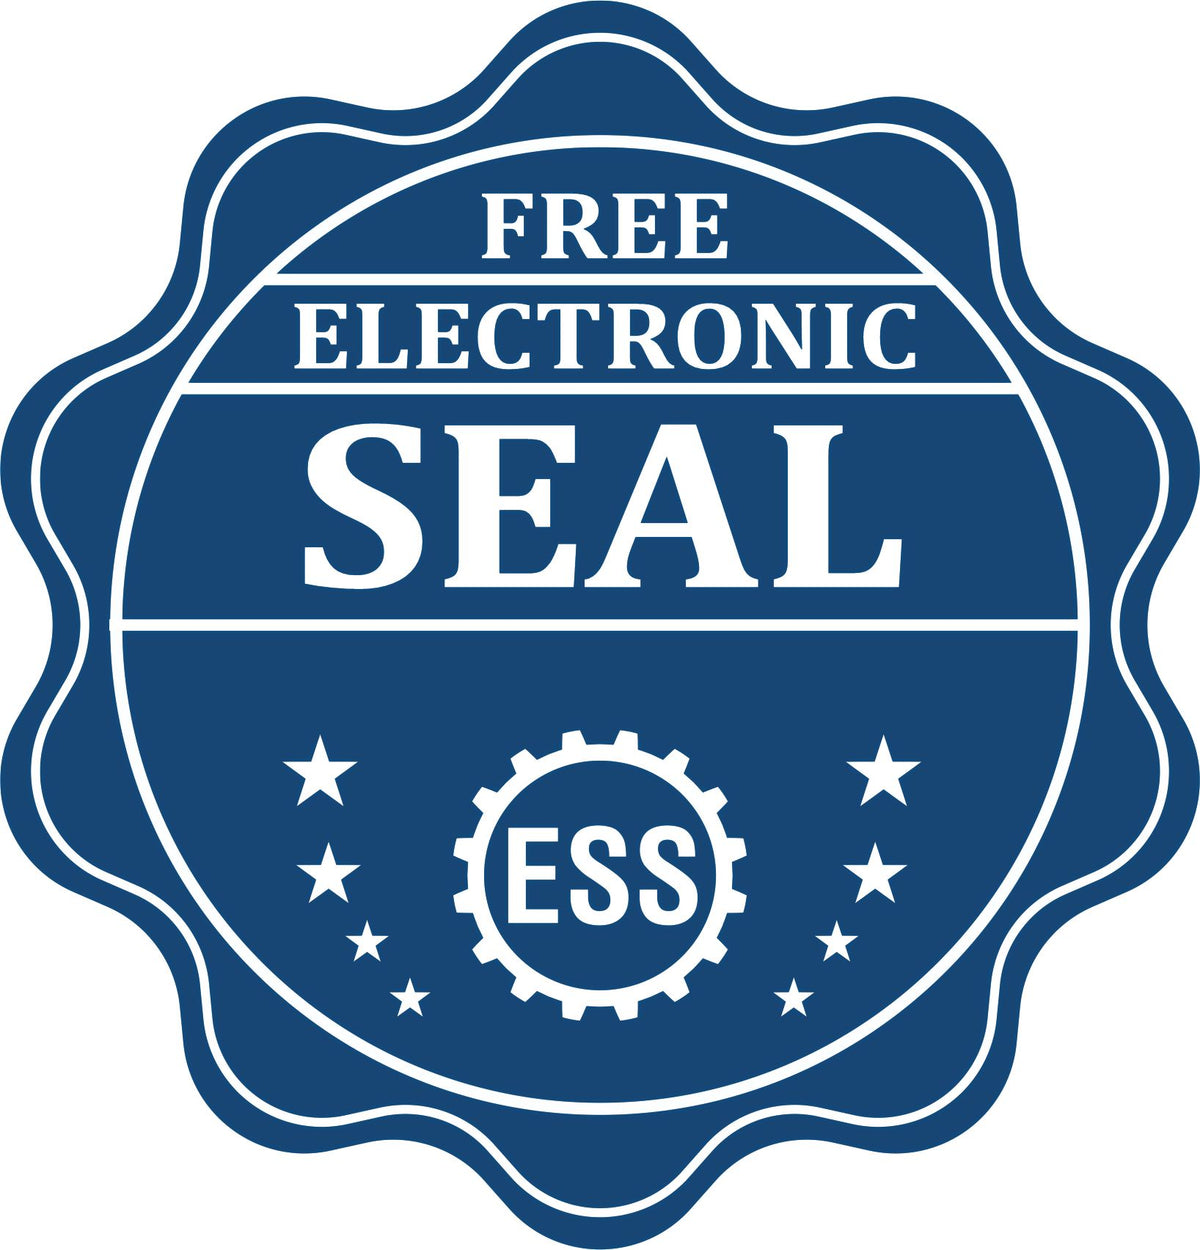 A badge showing a free electronic seal for the Soft Hawaii Professional Geologist Seal with stars and the ESS gear on the emblem.